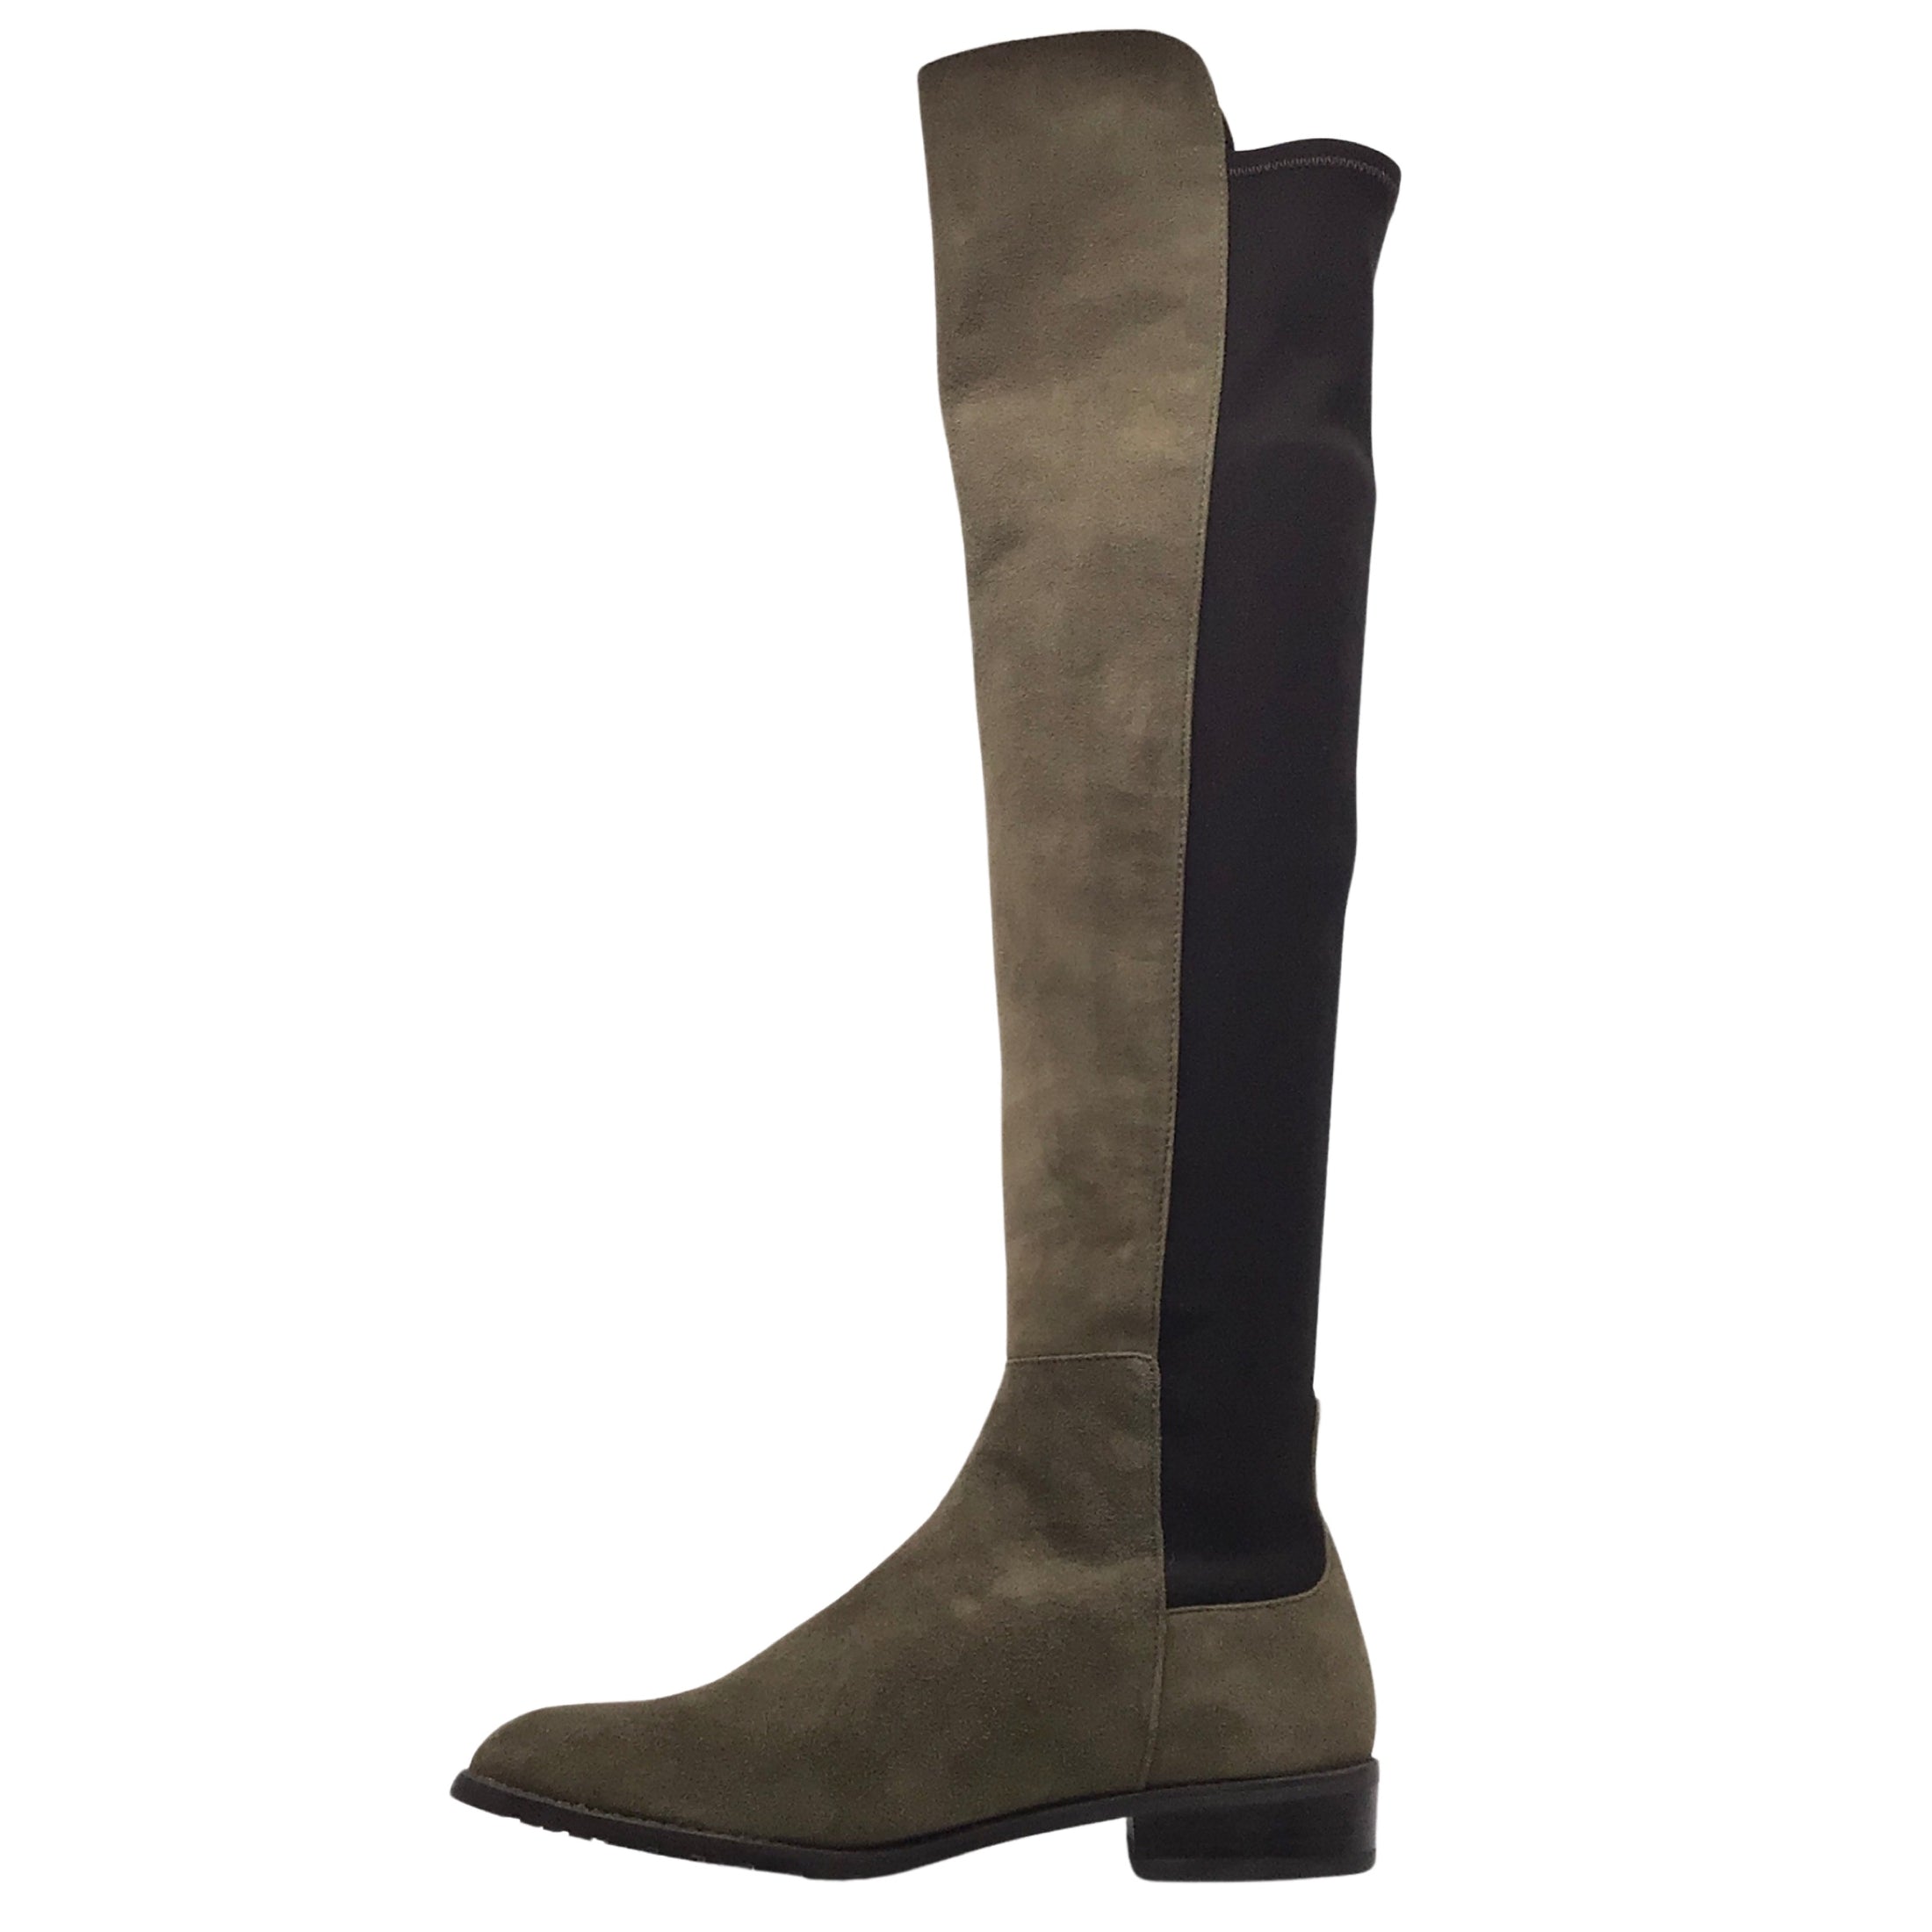 Stuart Weitzman Olive Green / Black Fringed Pull-On Knee-High Suede Leather Boots